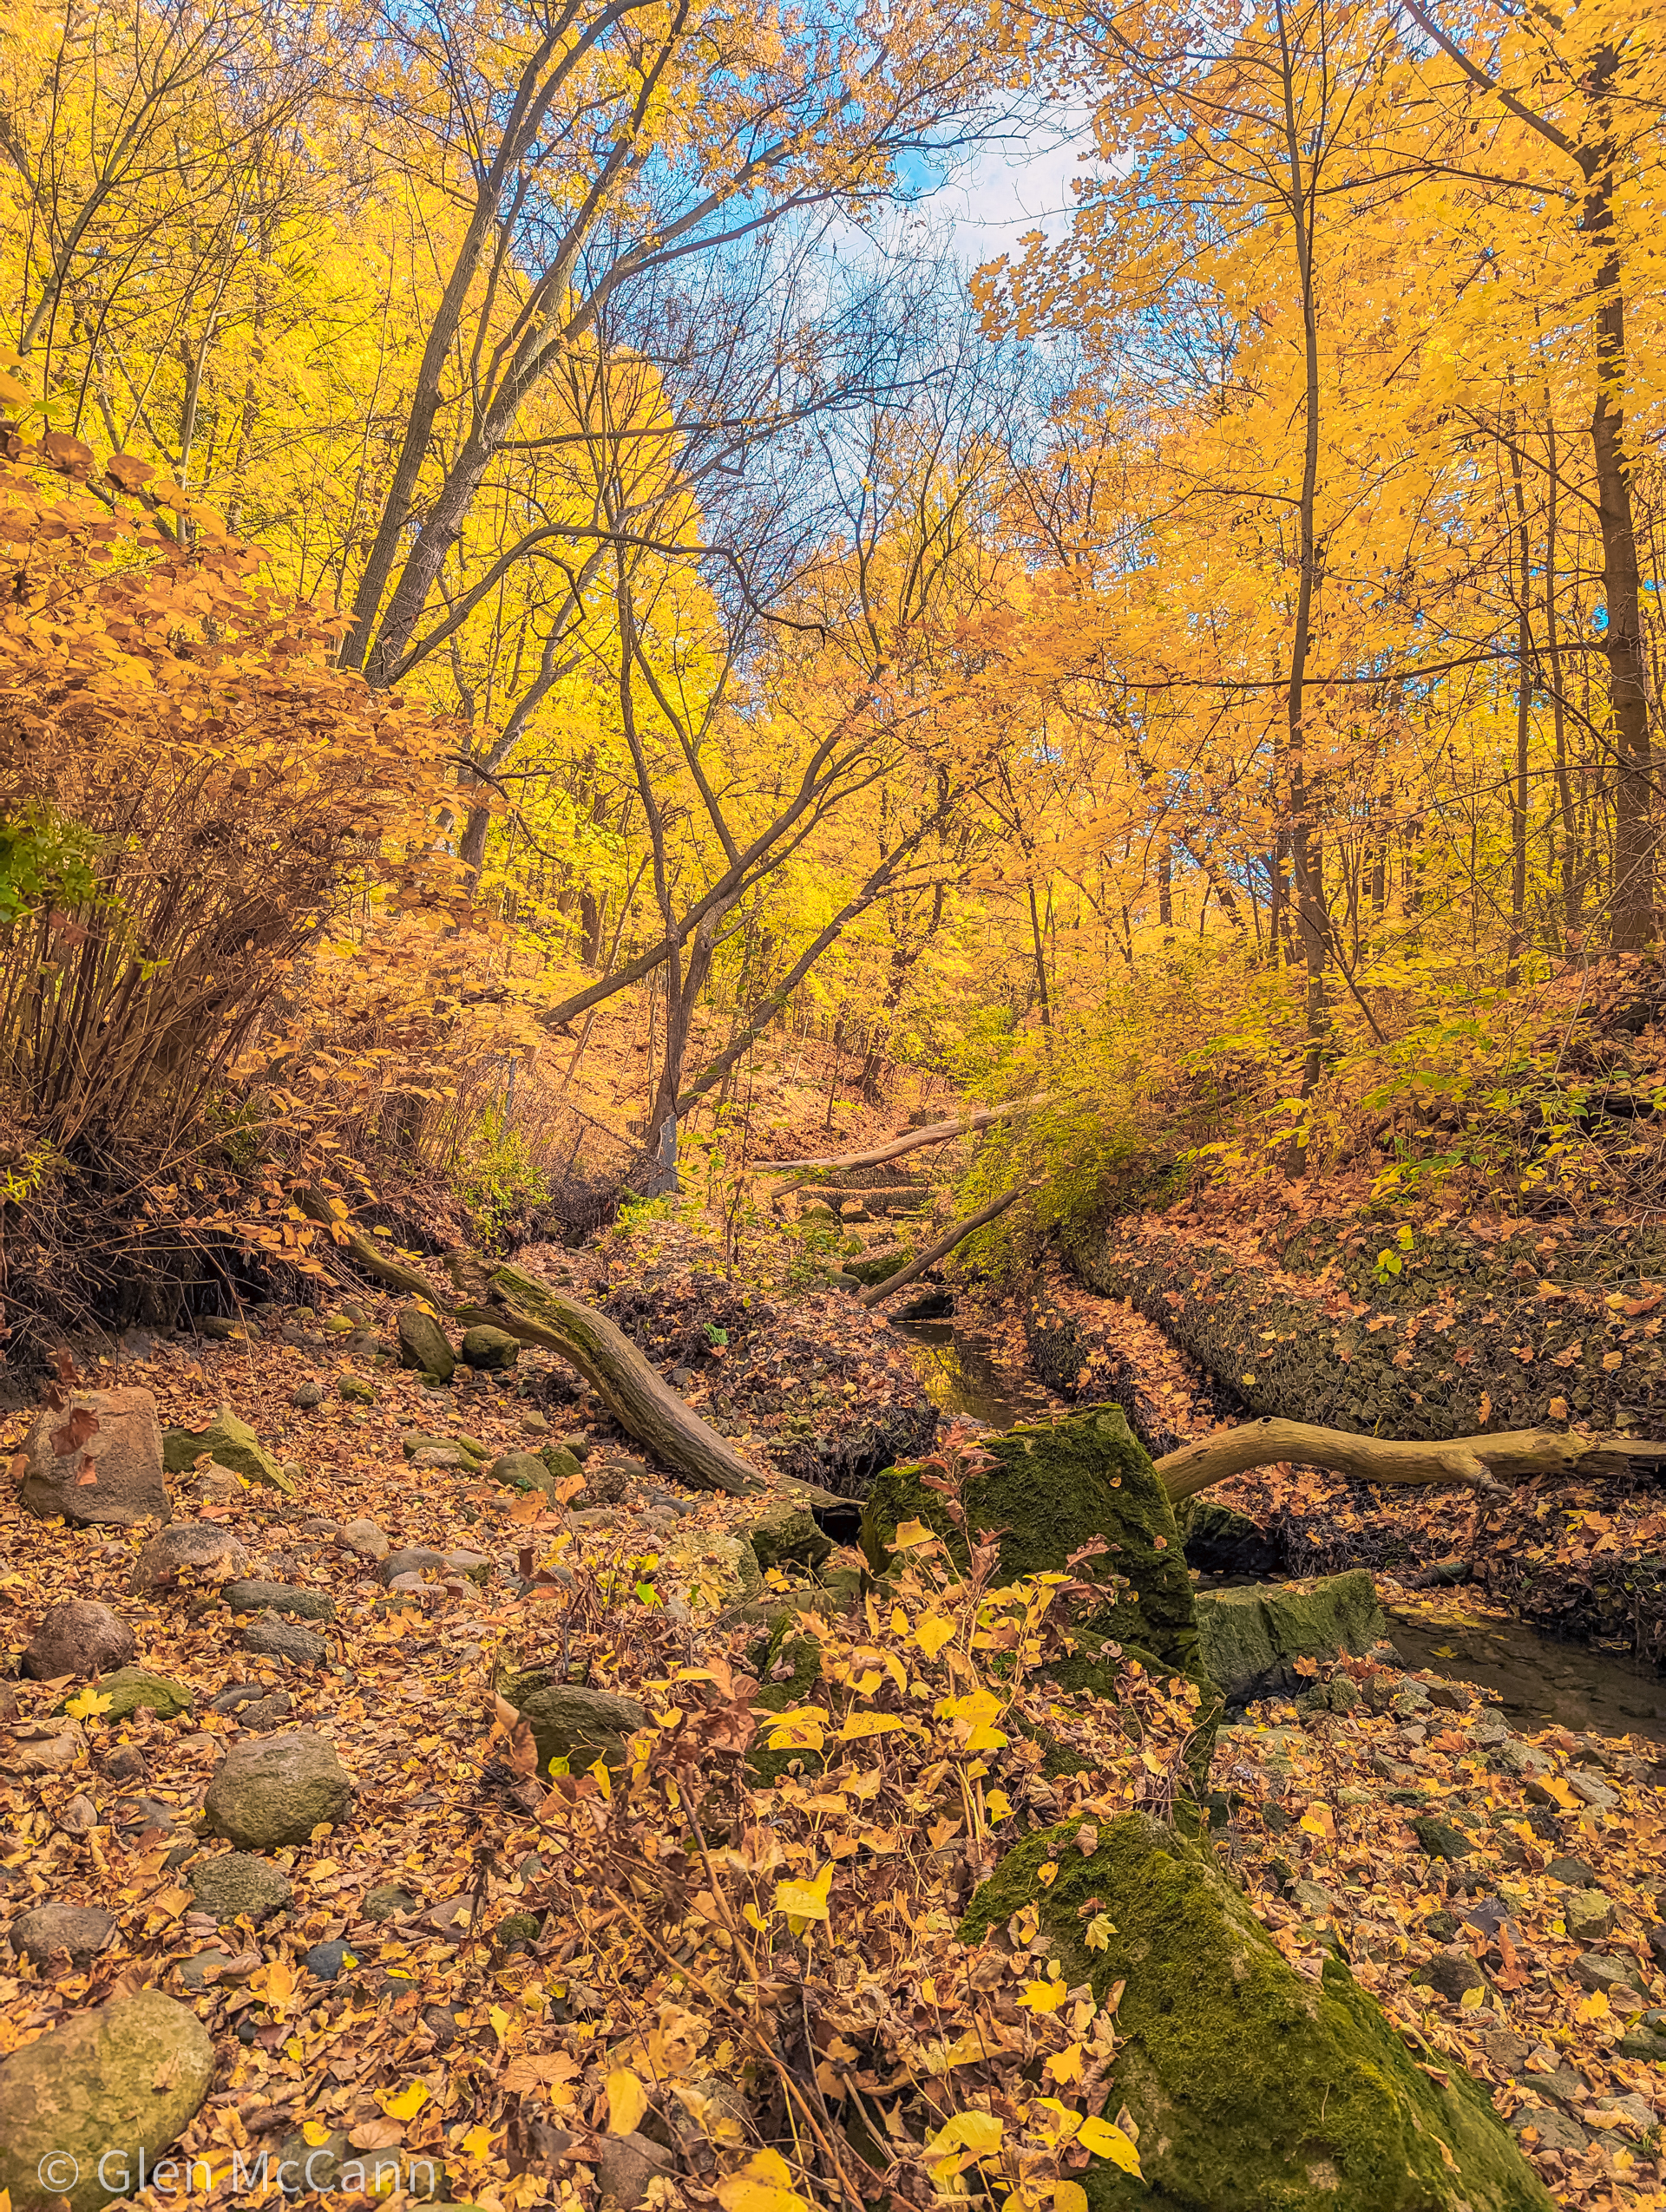 Photo of a forest floor completely covered in yellow leaves in the fall.